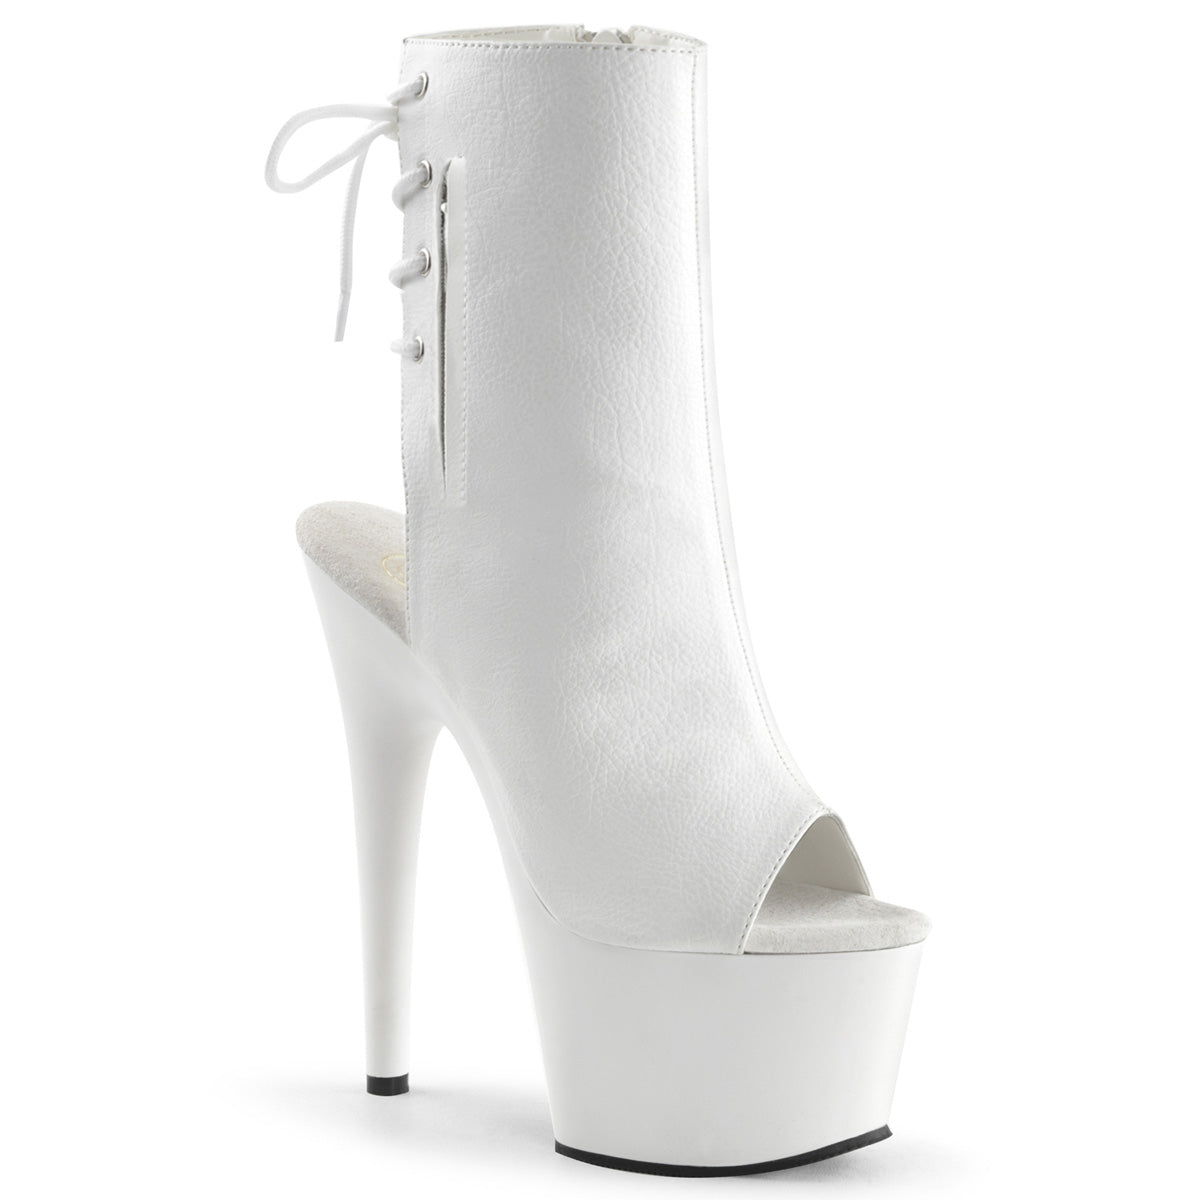 ADORE-1018 Pleasers 7 Inch Heel White Strippers Ankle Boots-Pleaser- Sexy Shoes